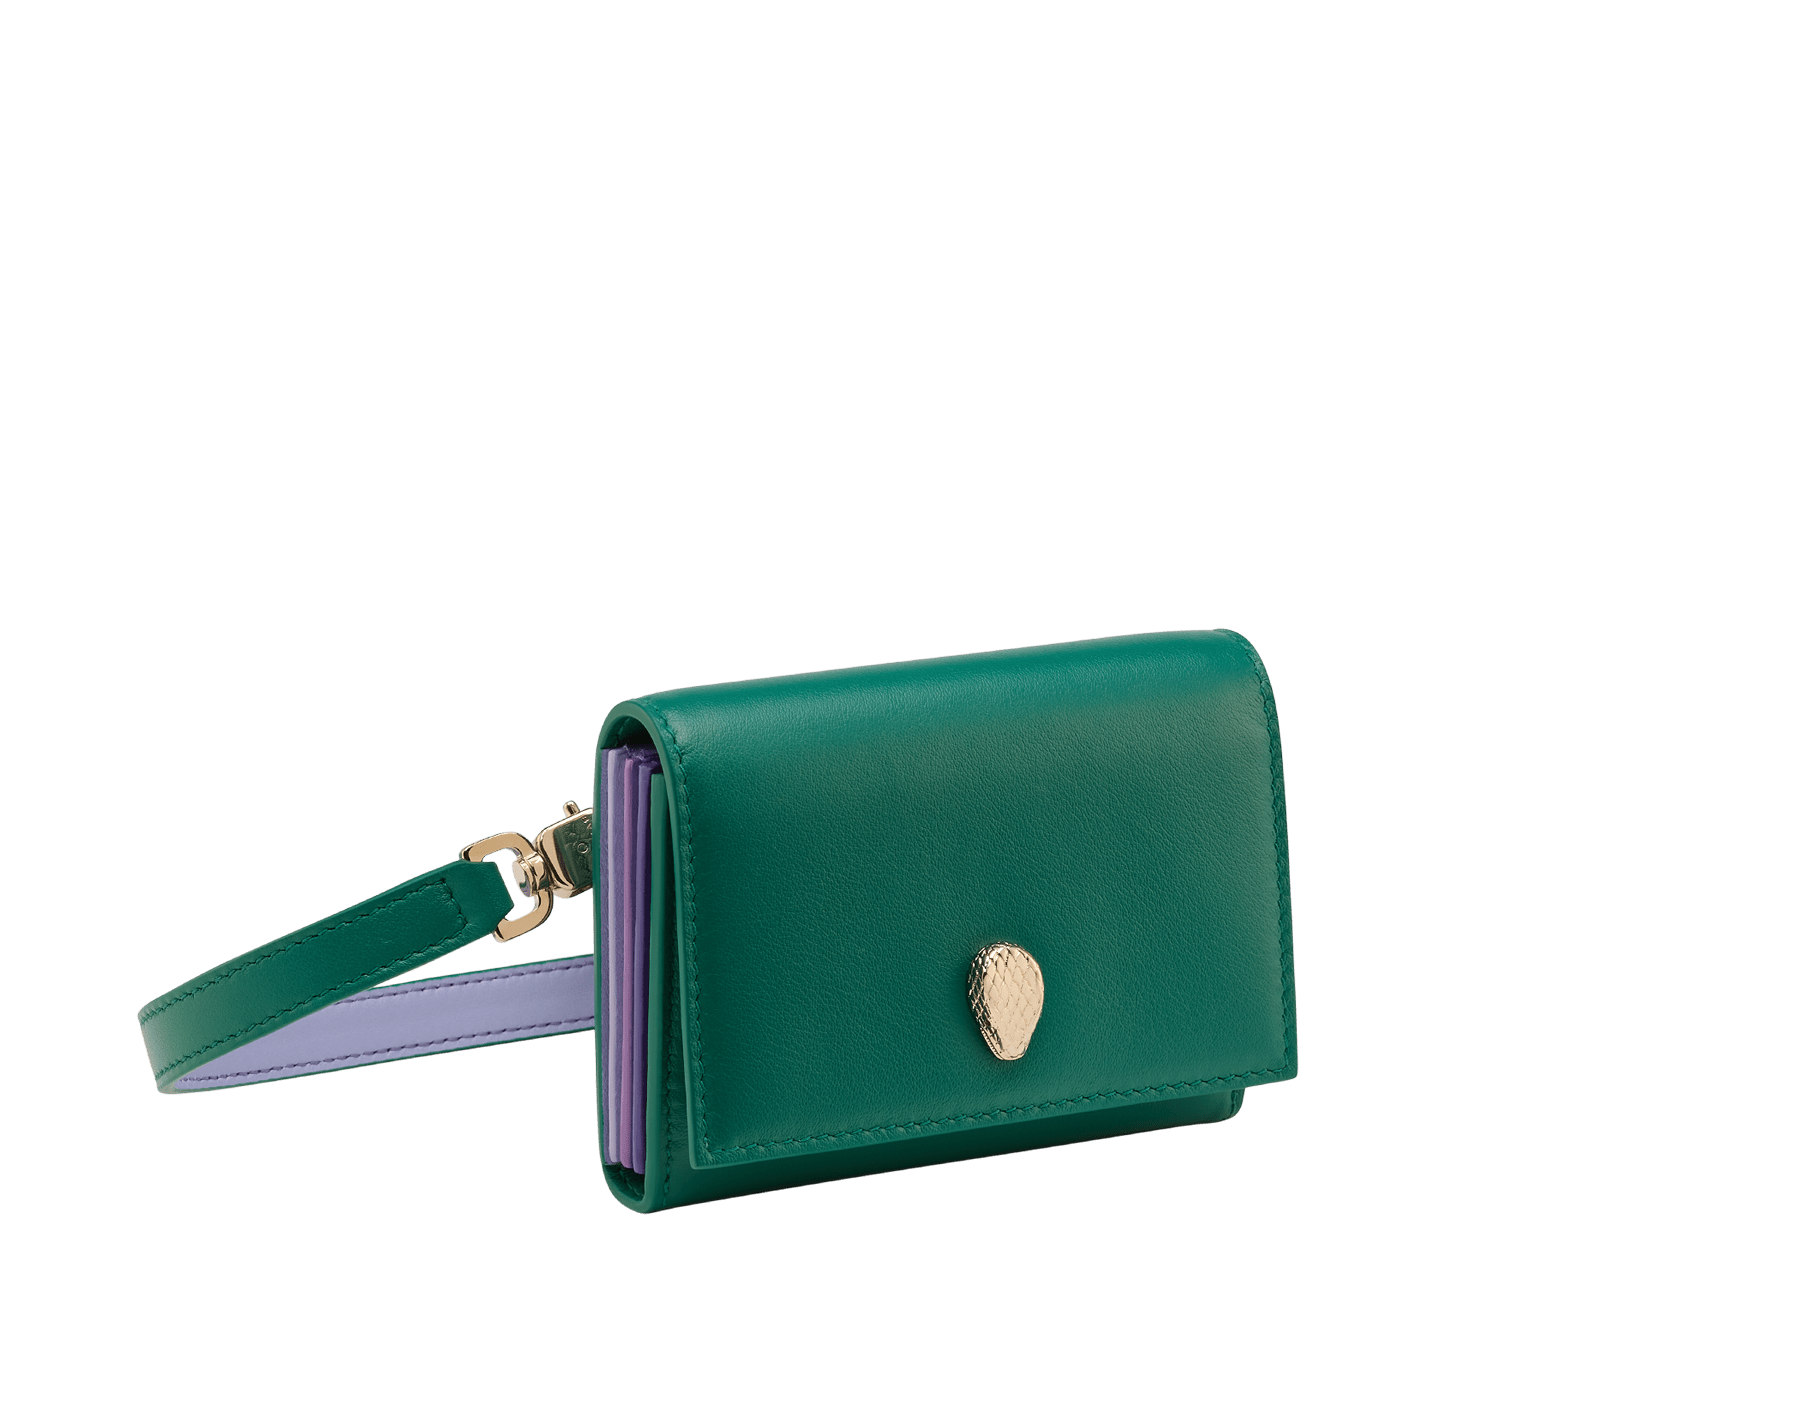 Serpenti Forever crossbody card holder in jade green Metropolitan calf leather with amethyst purple, lavender and sheer amethyst lilac nappa leather side details, and black moiré lining. Captivating magnetic snakehead closure in light gold-plated brass embellished with red enamel eyes. SEACCACCOWSTRAP image 1